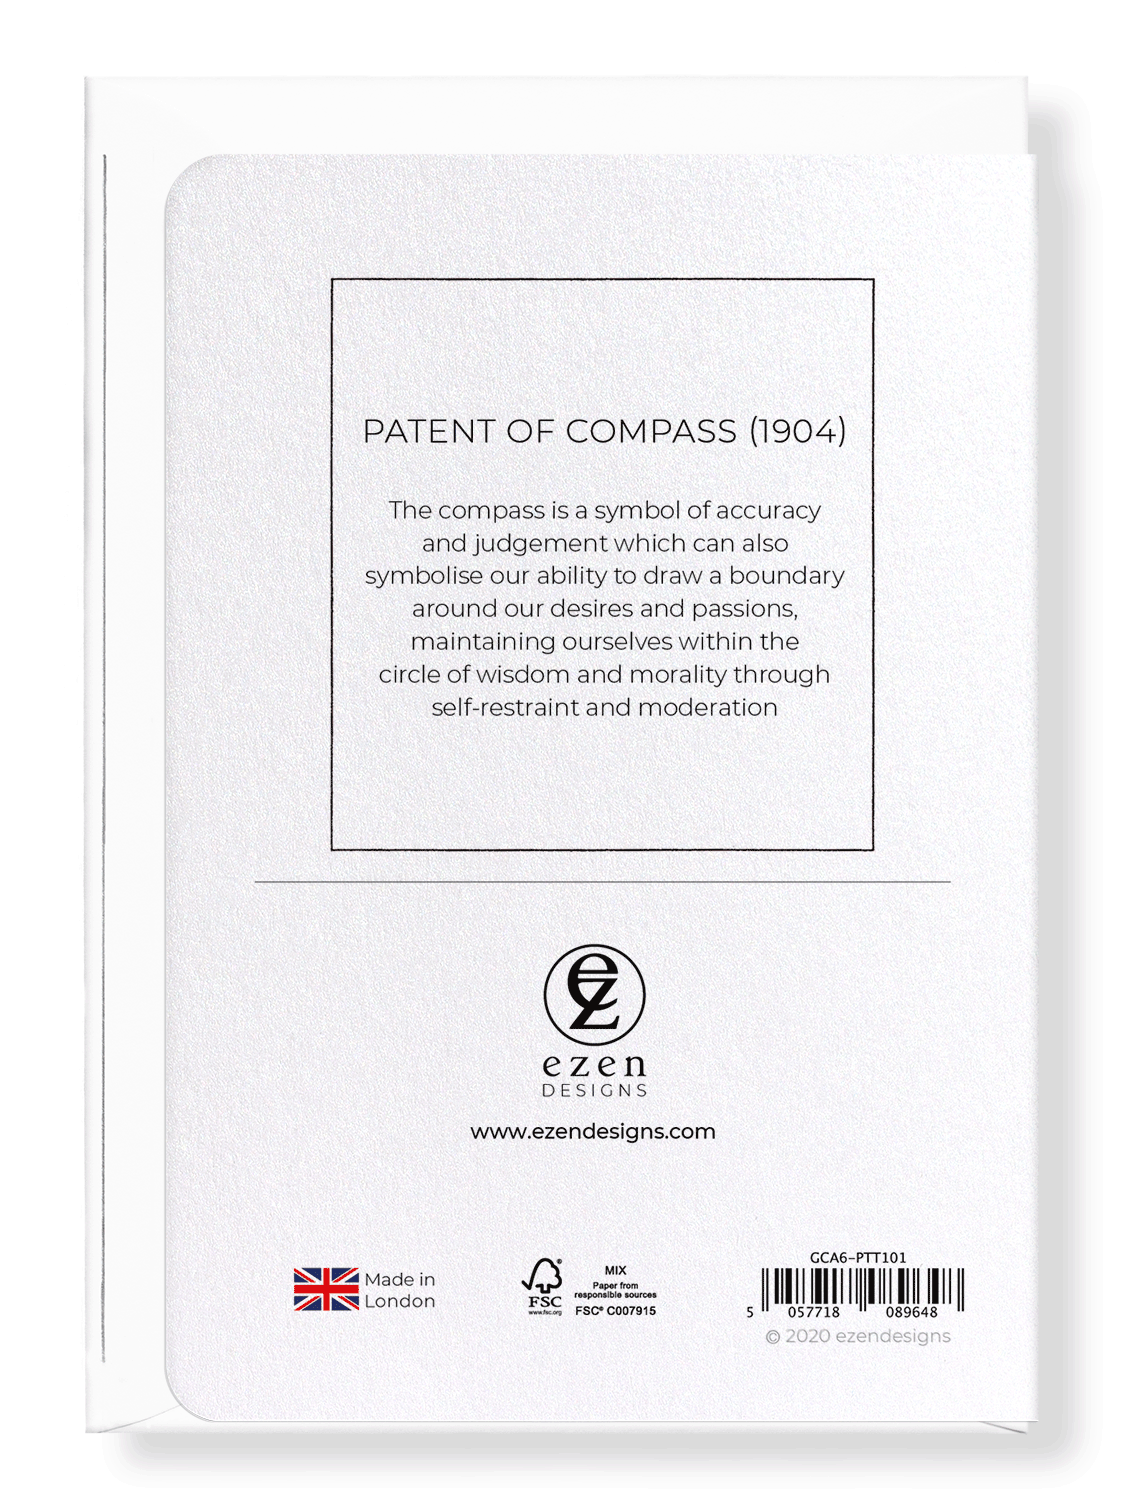 Ezen Designs - Patent of compass (1904) - Greeting Card - Back